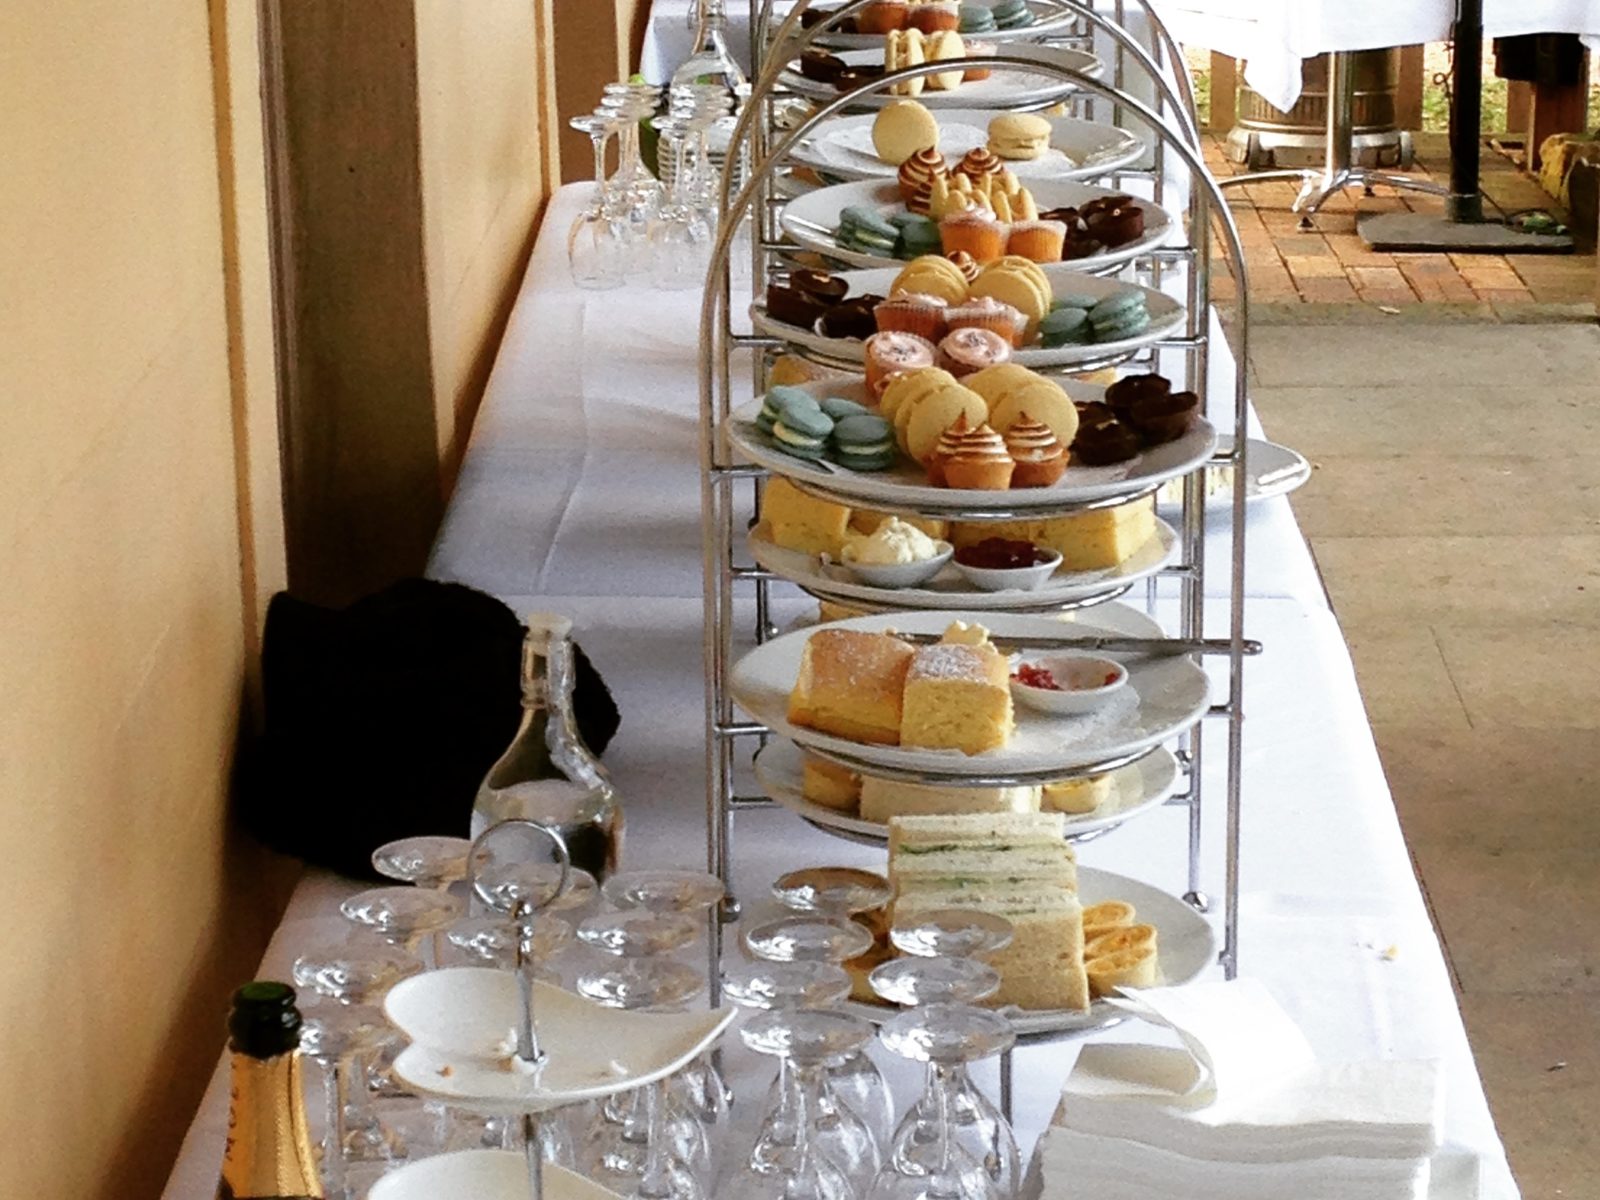 high tea set up on the front balcony